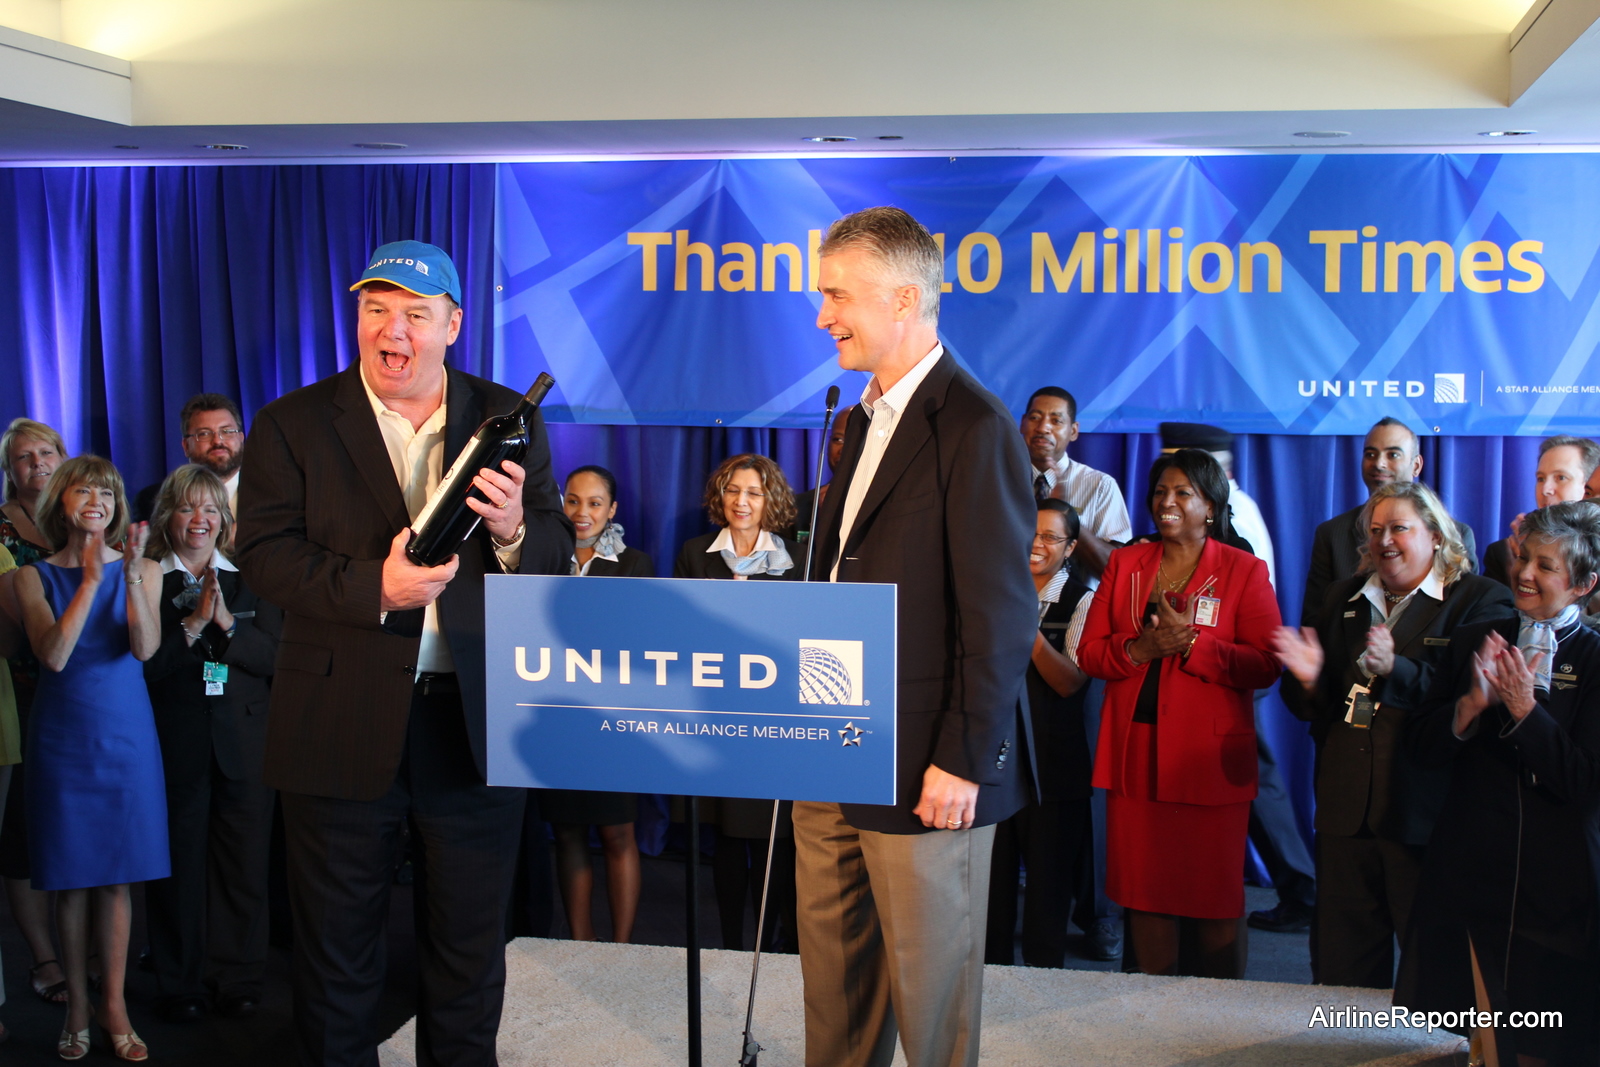 United Frequent Flyer Program Partners